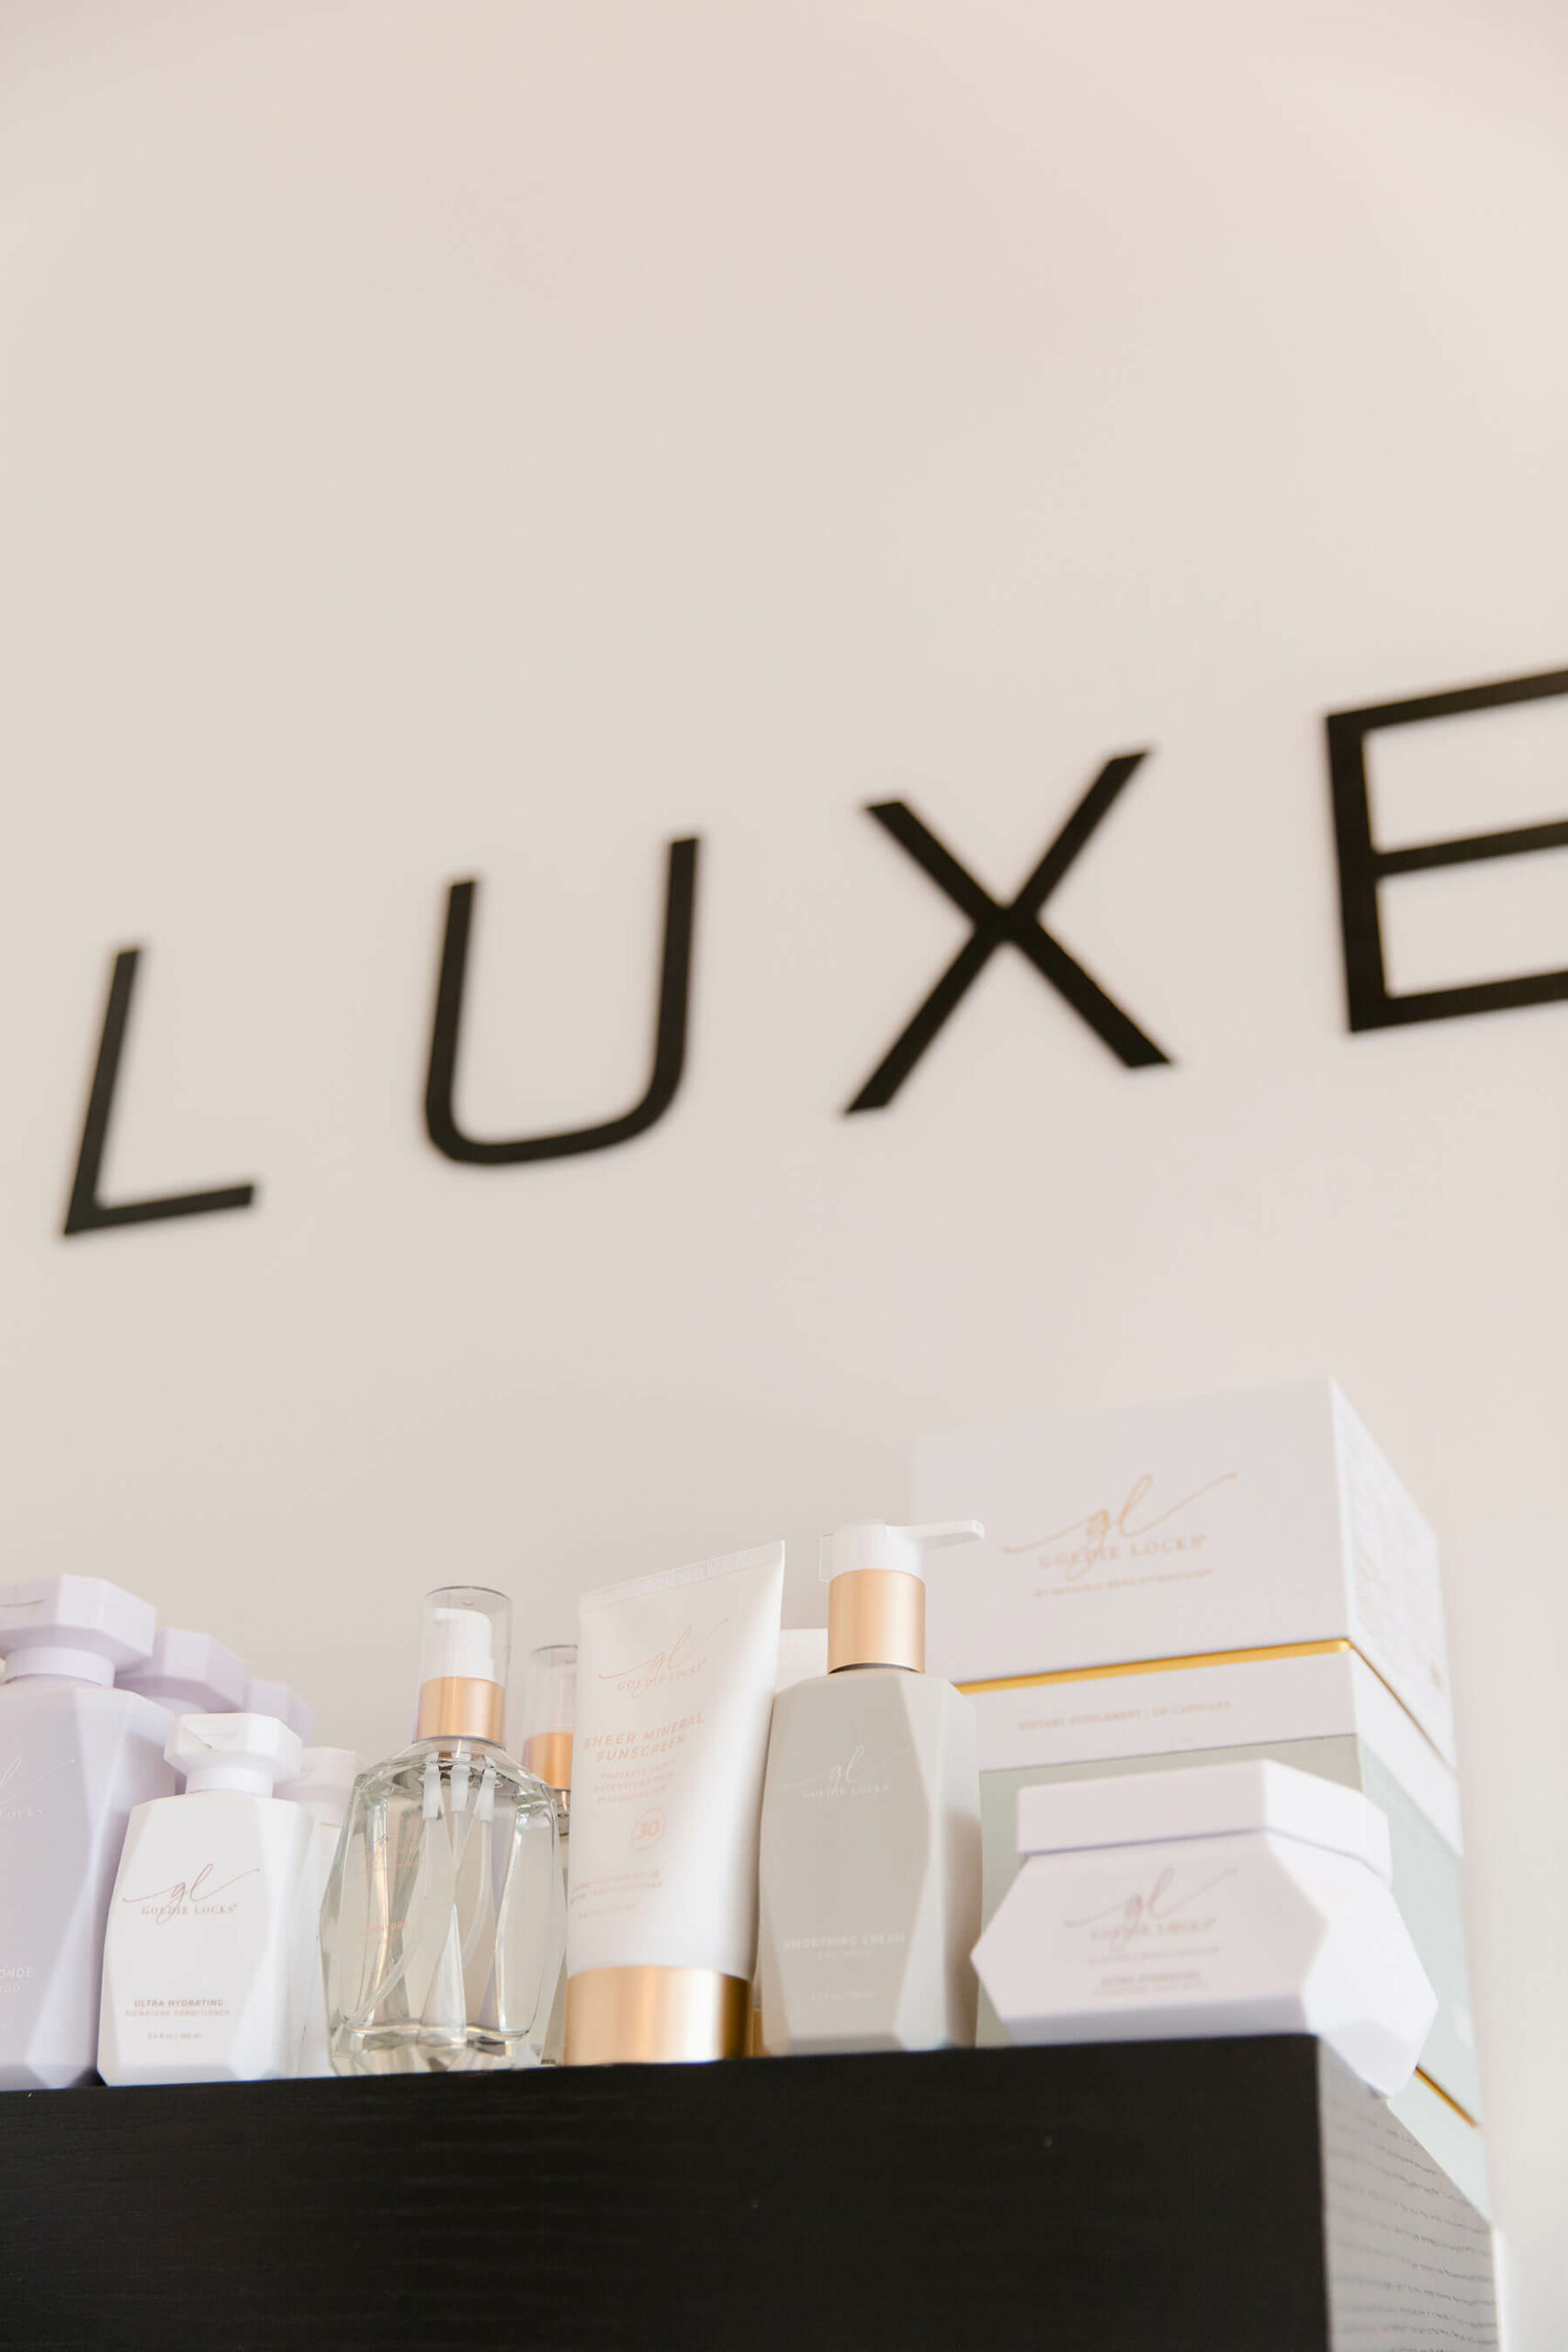 Products at Luxe + mane salon